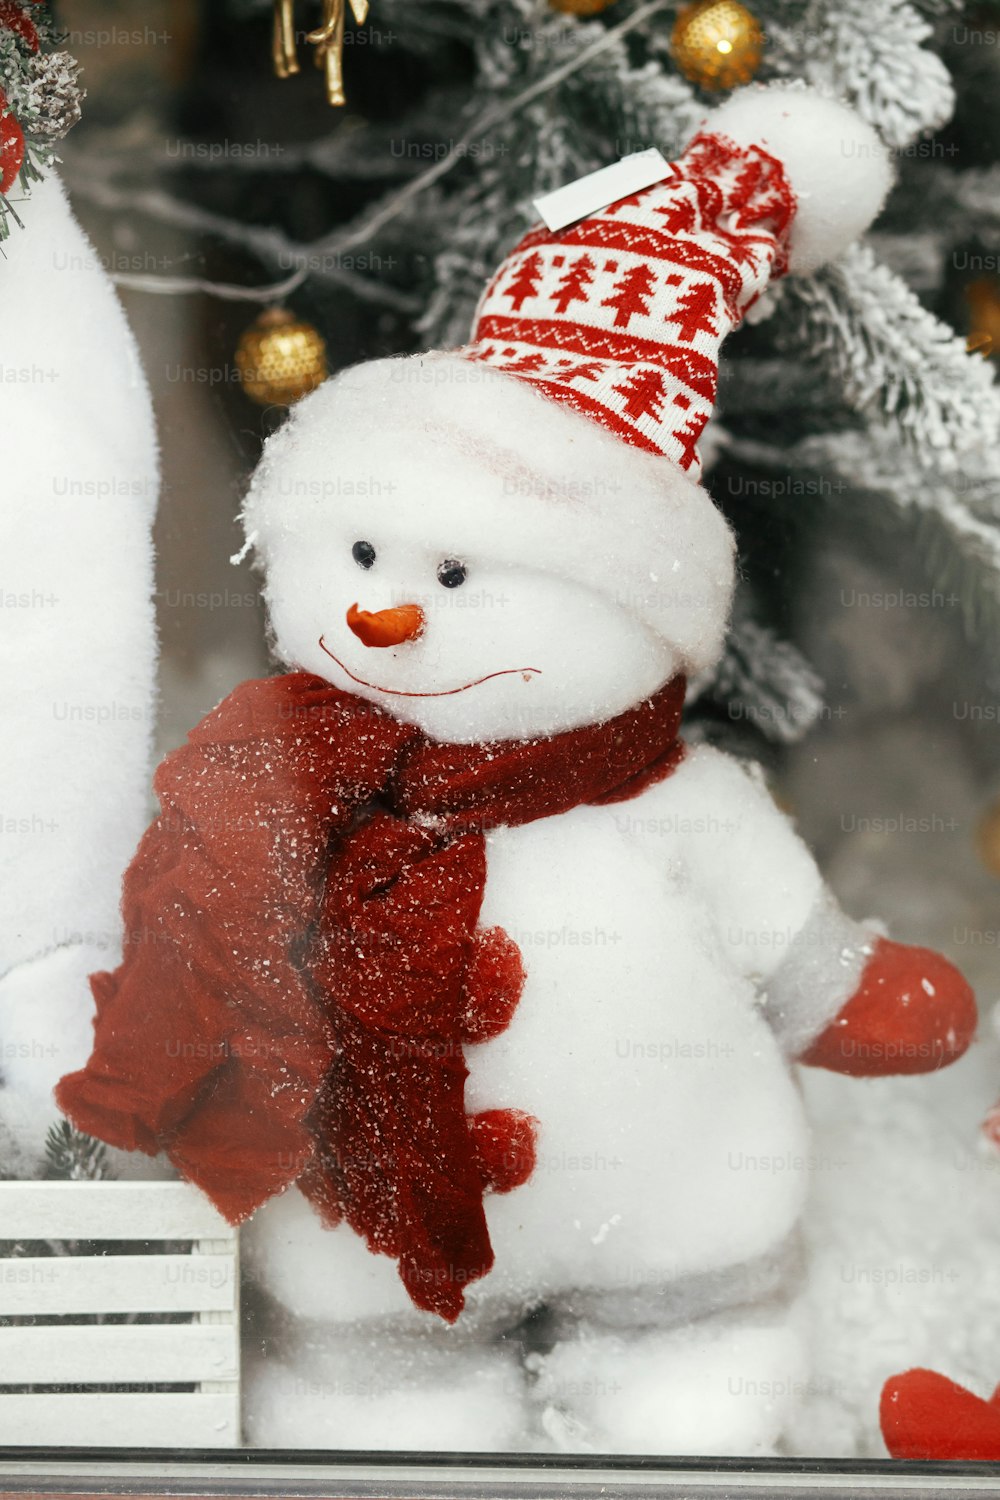 Stylish cute snowman in hat and with scarf toy under modern christmas tree. Christmas festive decor for winter holidays in european city street. Merry Christmas!